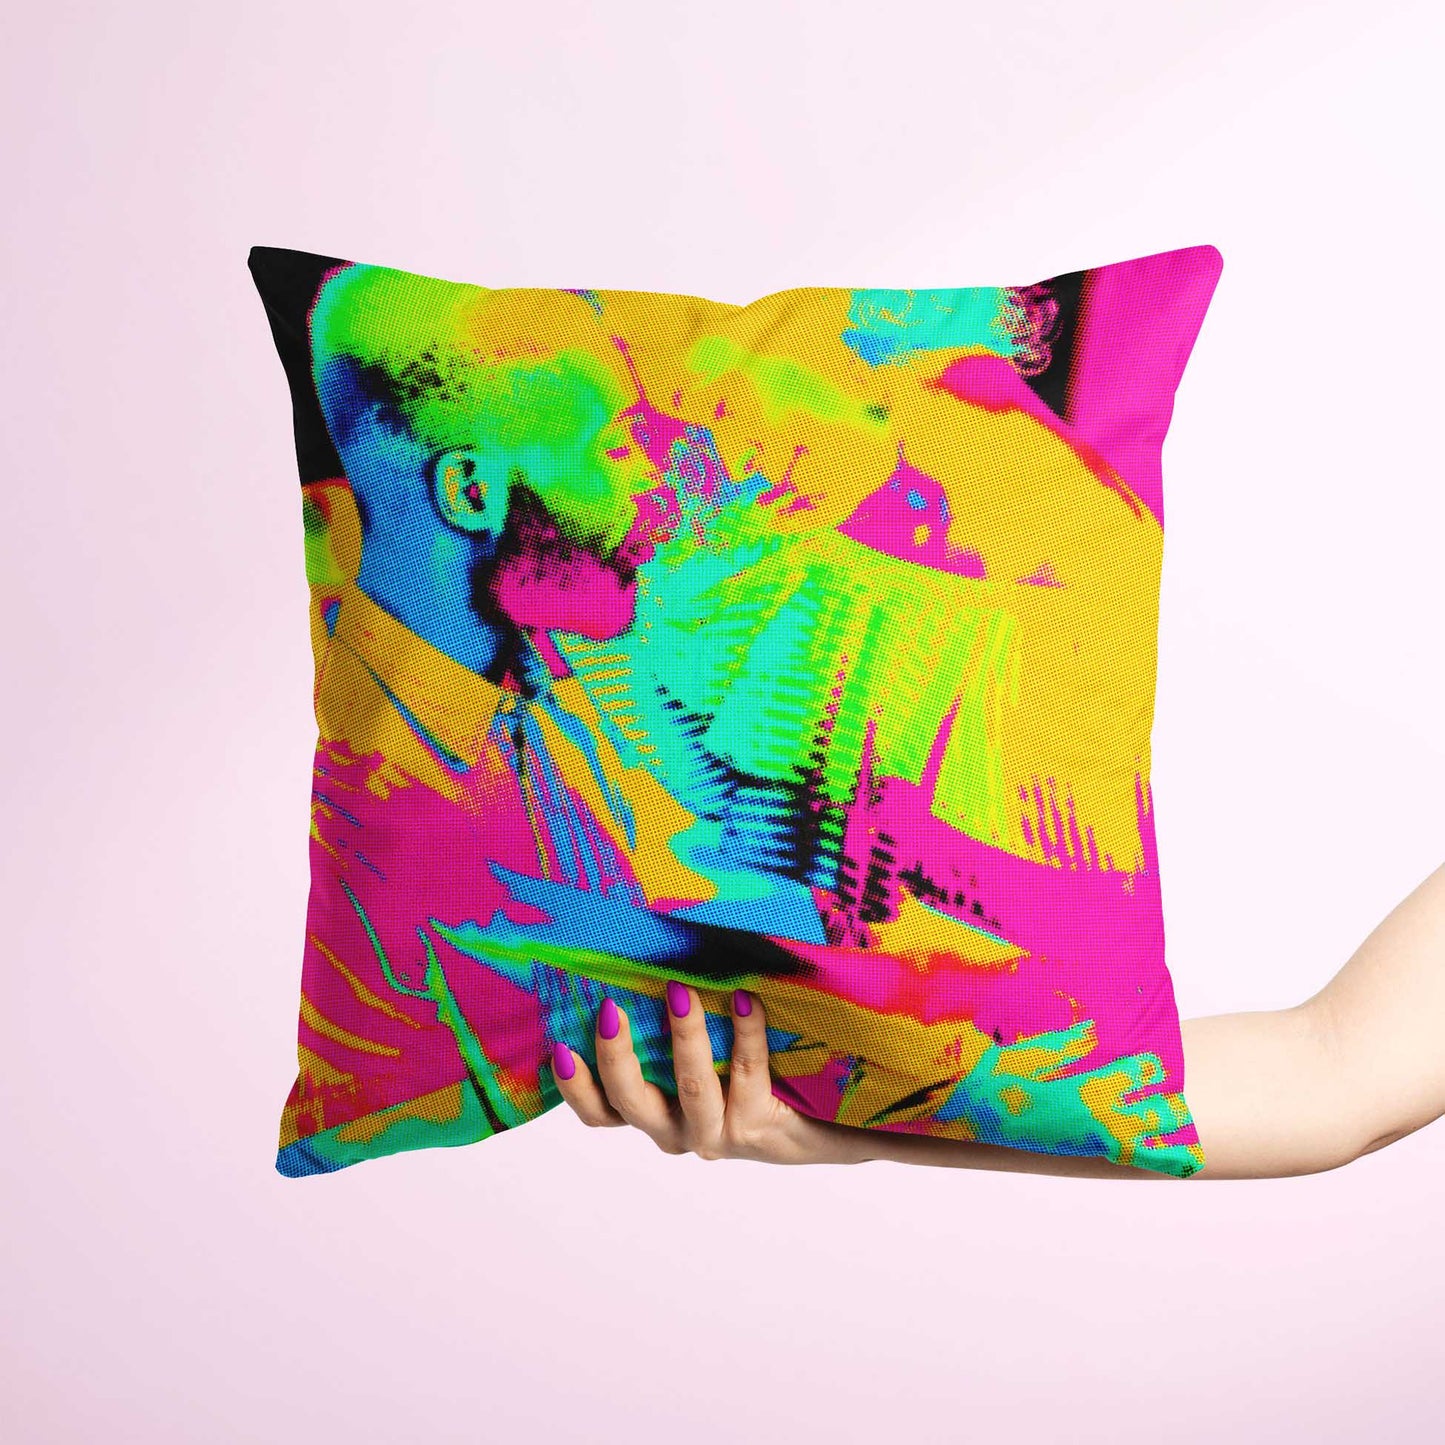 Make a statement with the Personalised Pop Art Cushion, a cool and original addition to your home decor. Printed from your photo, it showcases a unique and quirky design that sparks imagination. Handmade with soft velvet